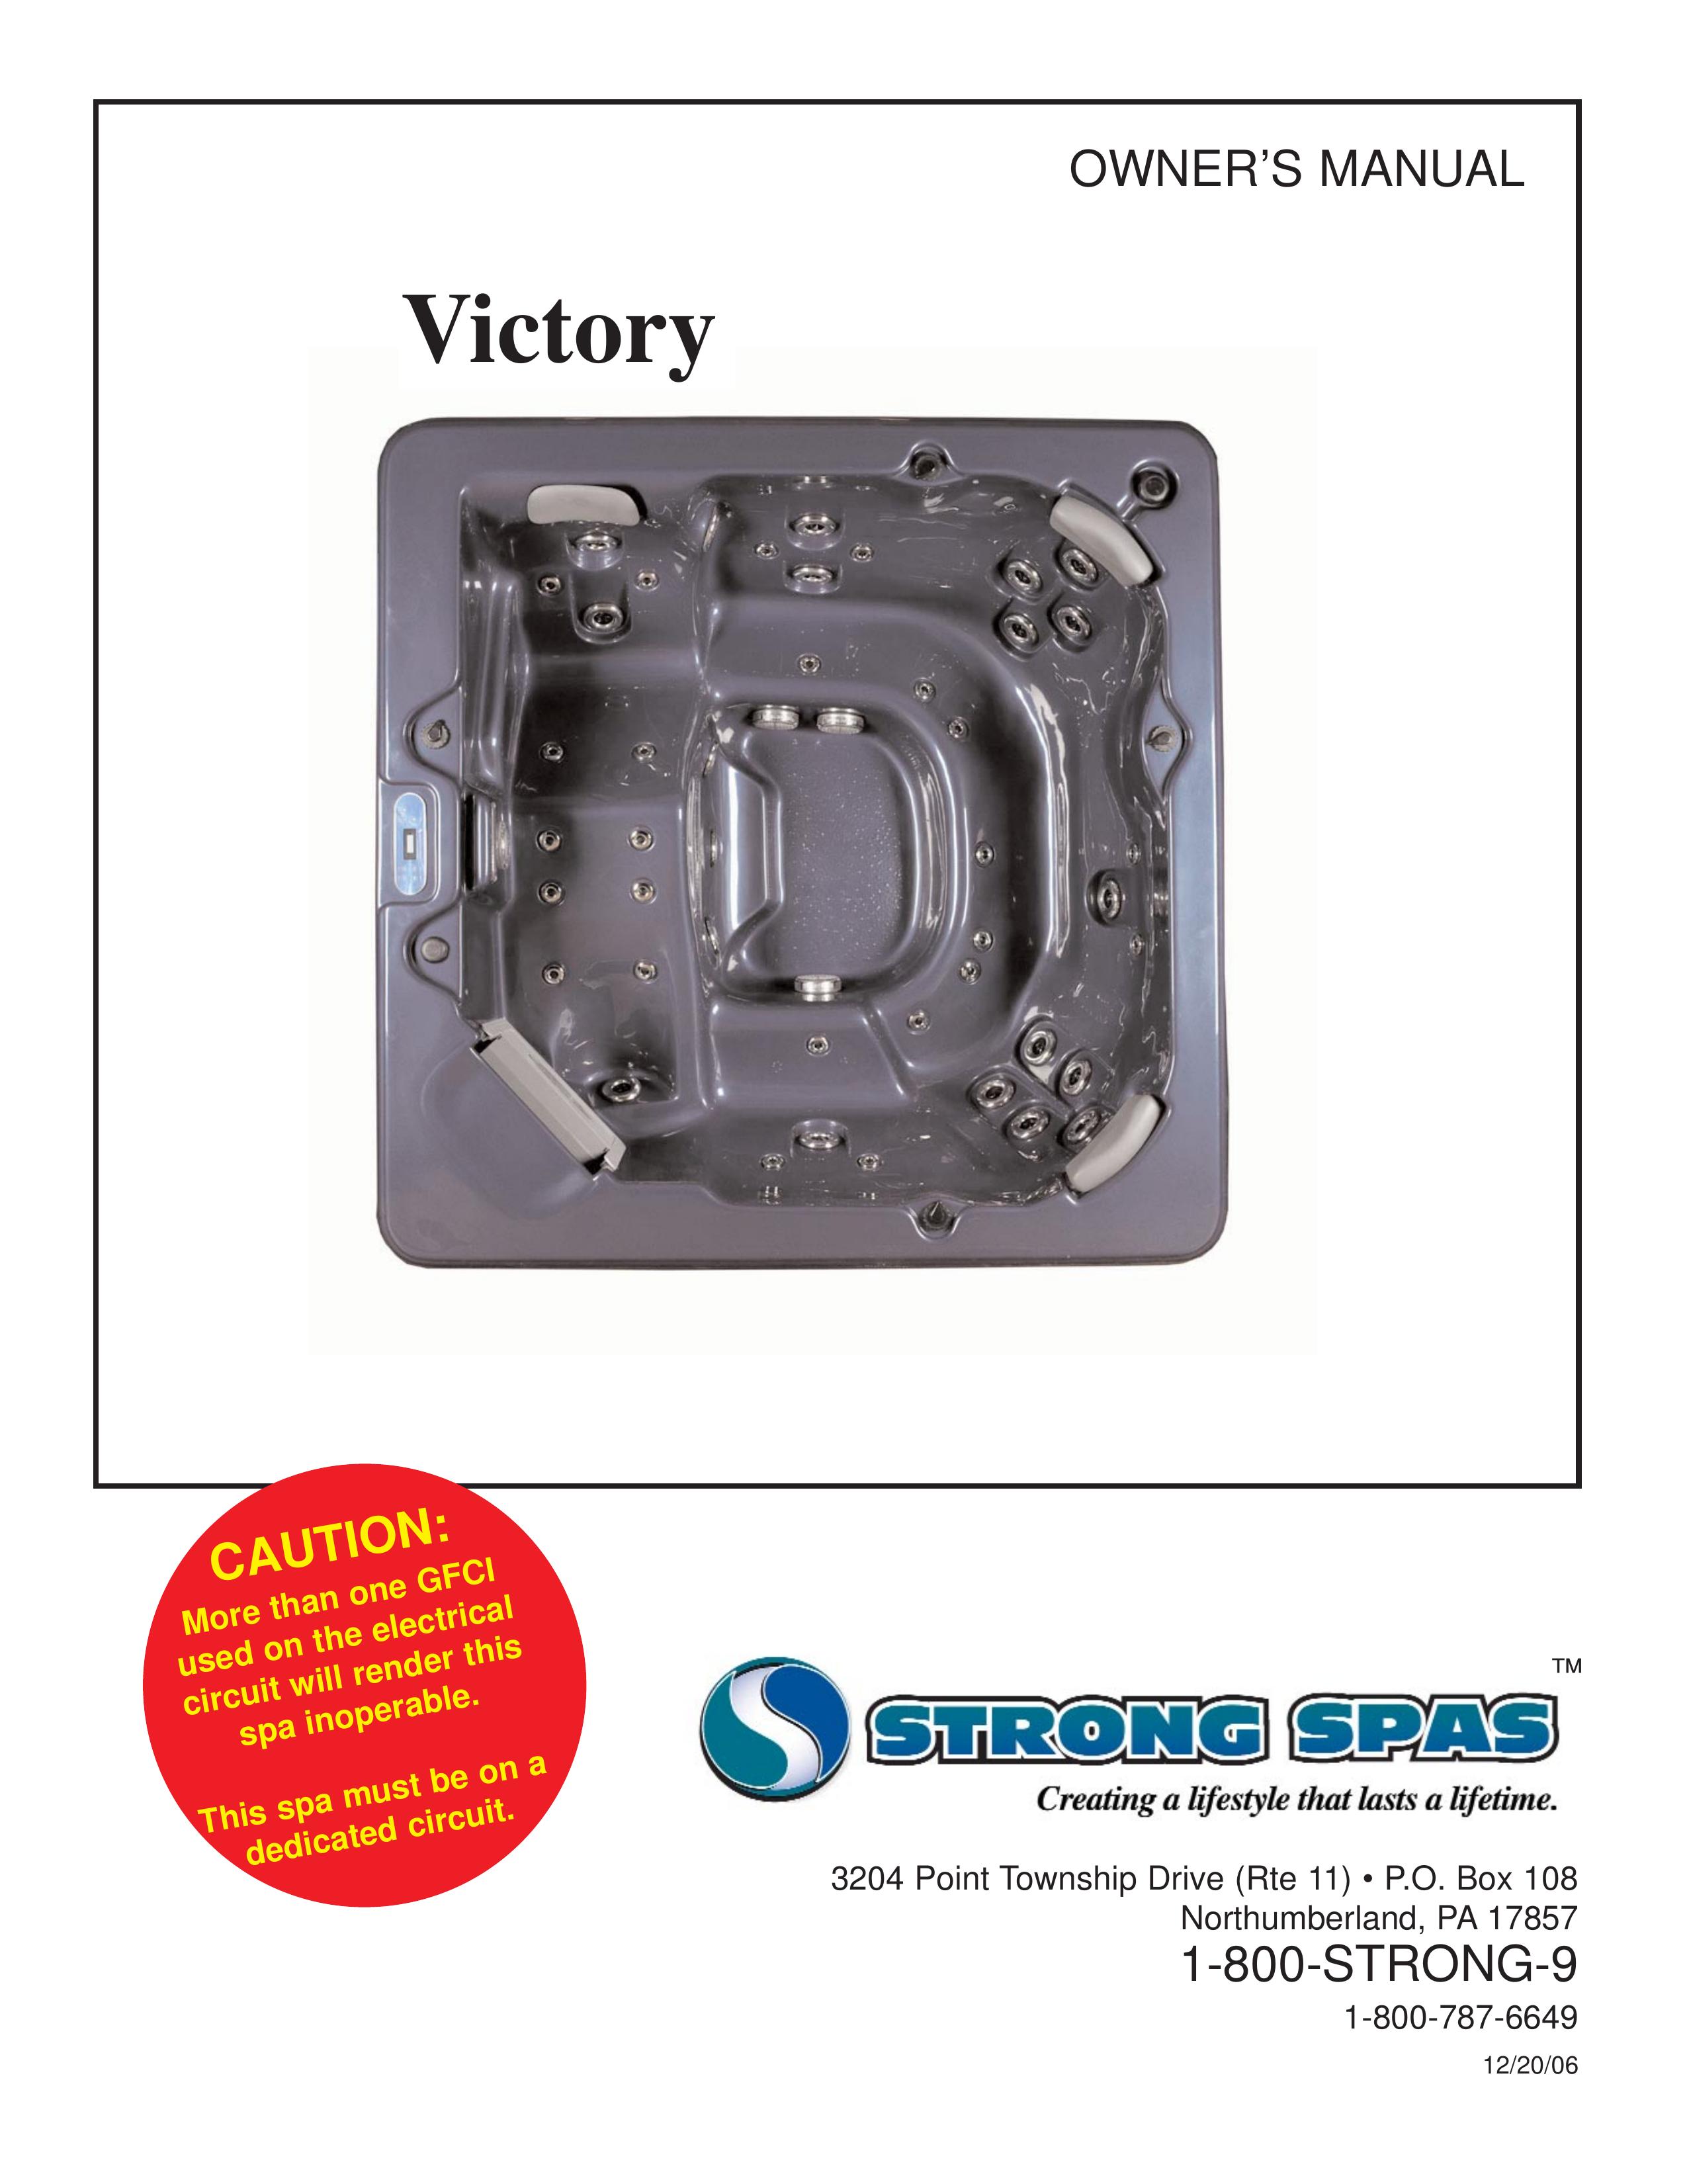 Strong Pools and Spas Victory Spa Swimming Pool Vacuum User Manual